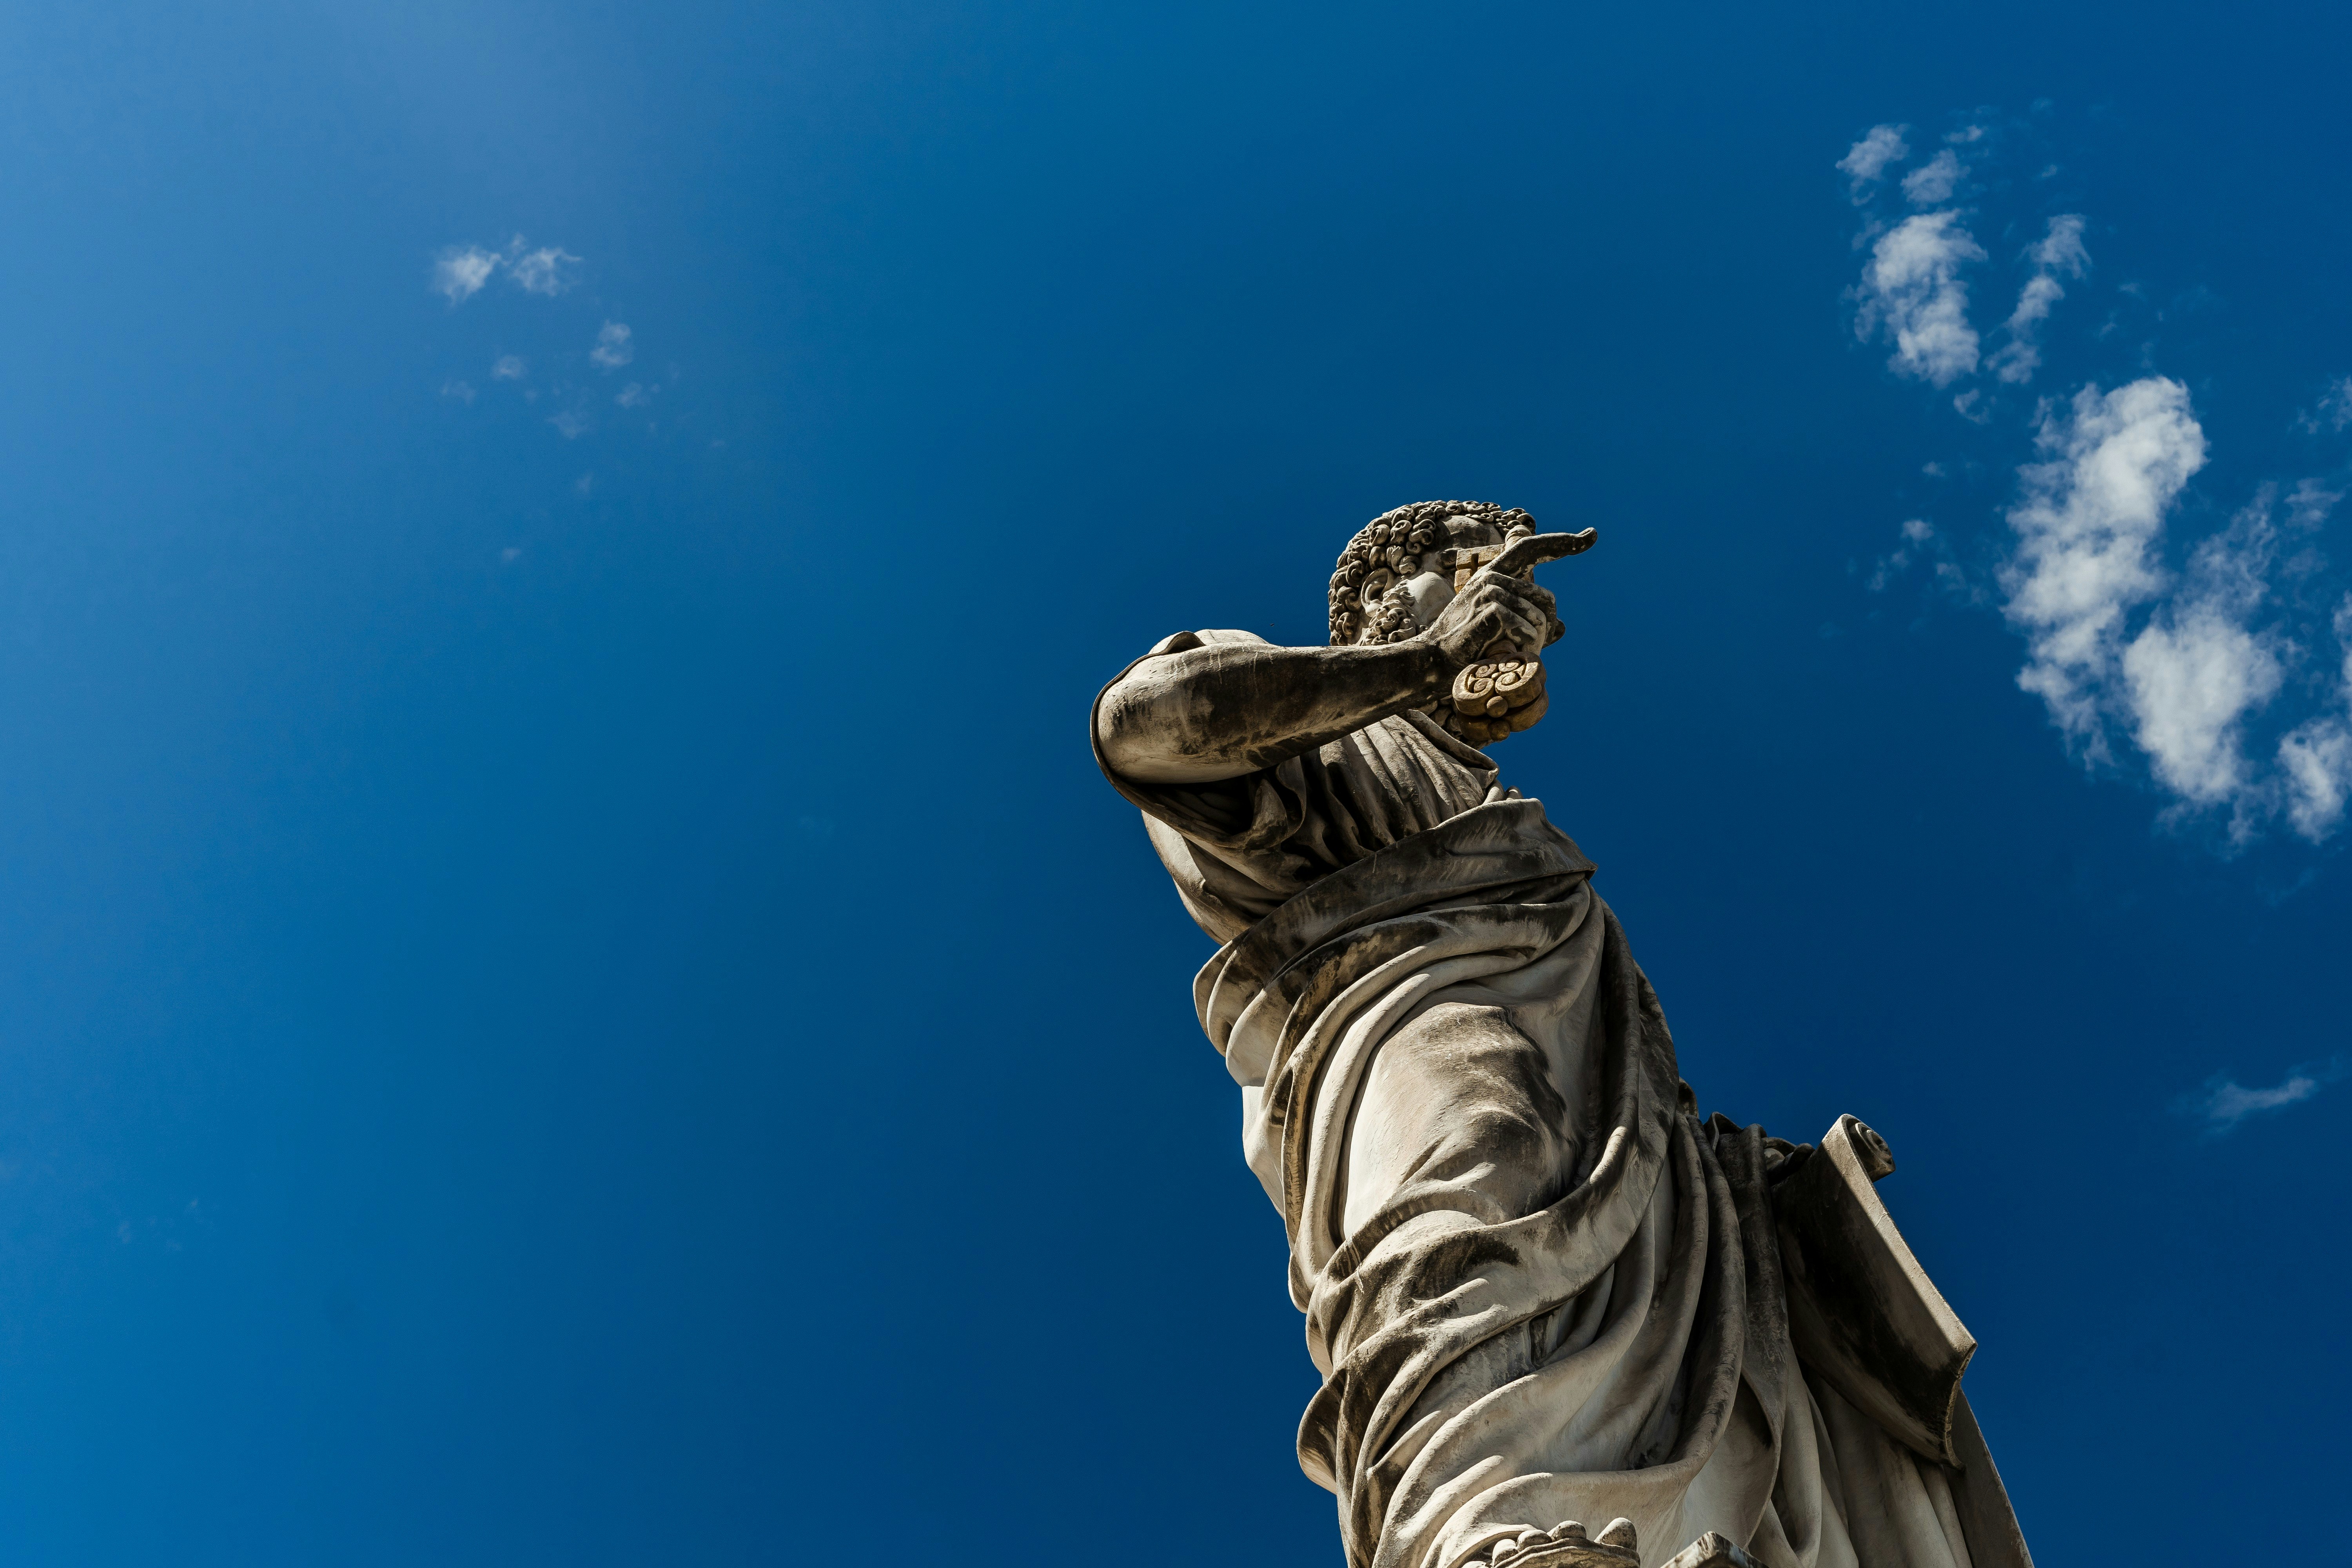 man standing statue under blue and white skies